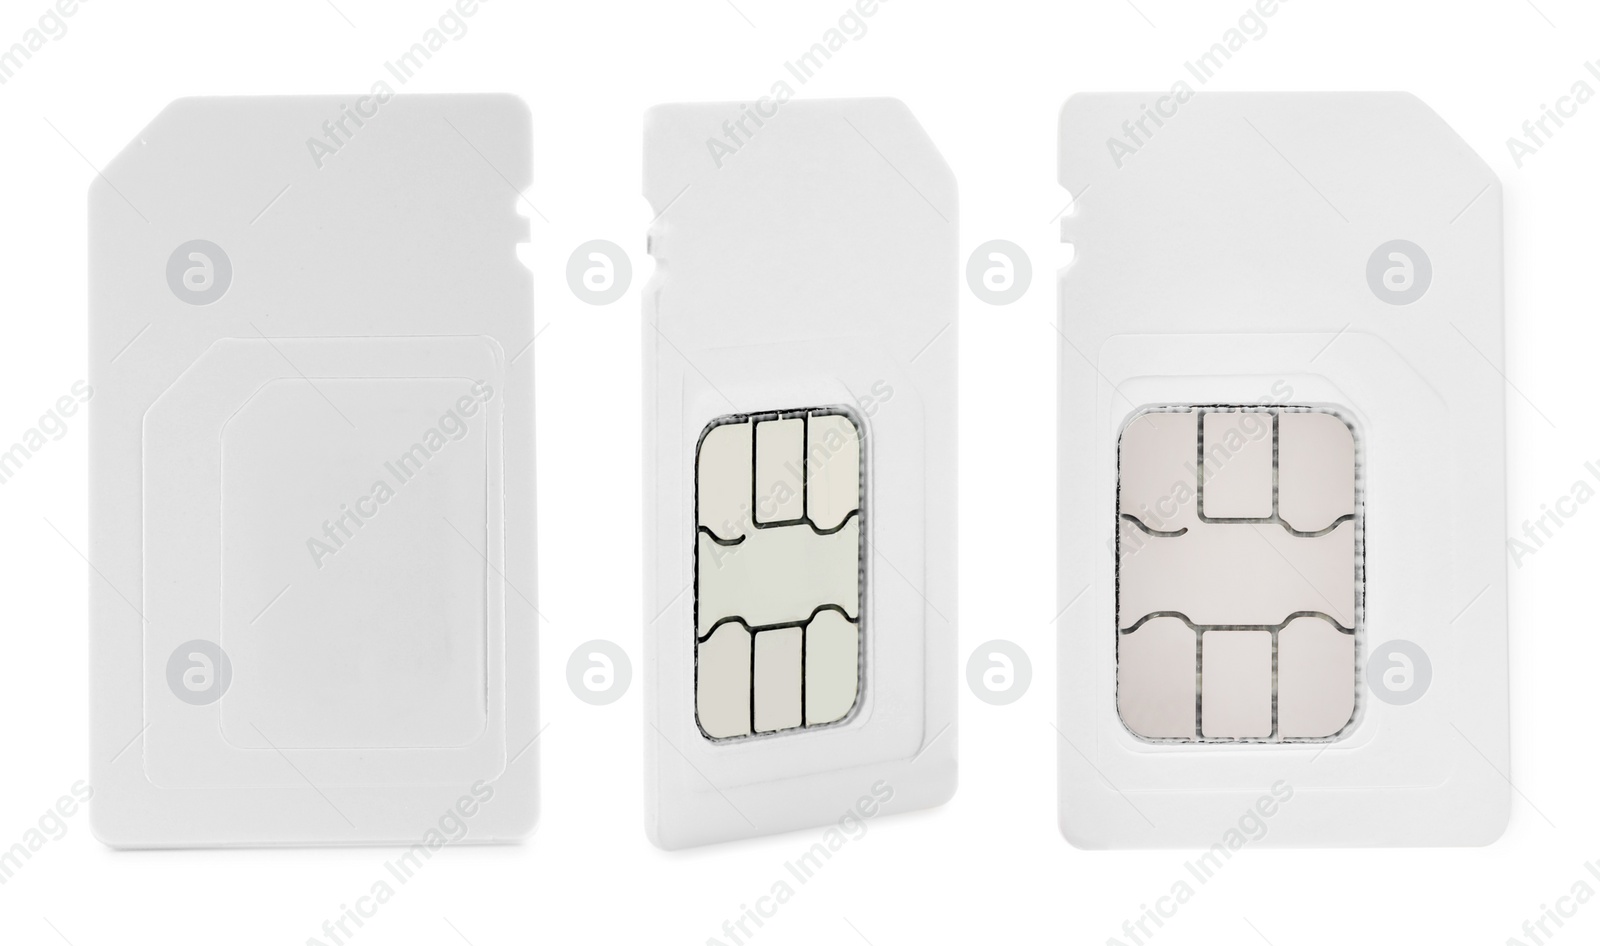 Image of Set with SIM cards on white background